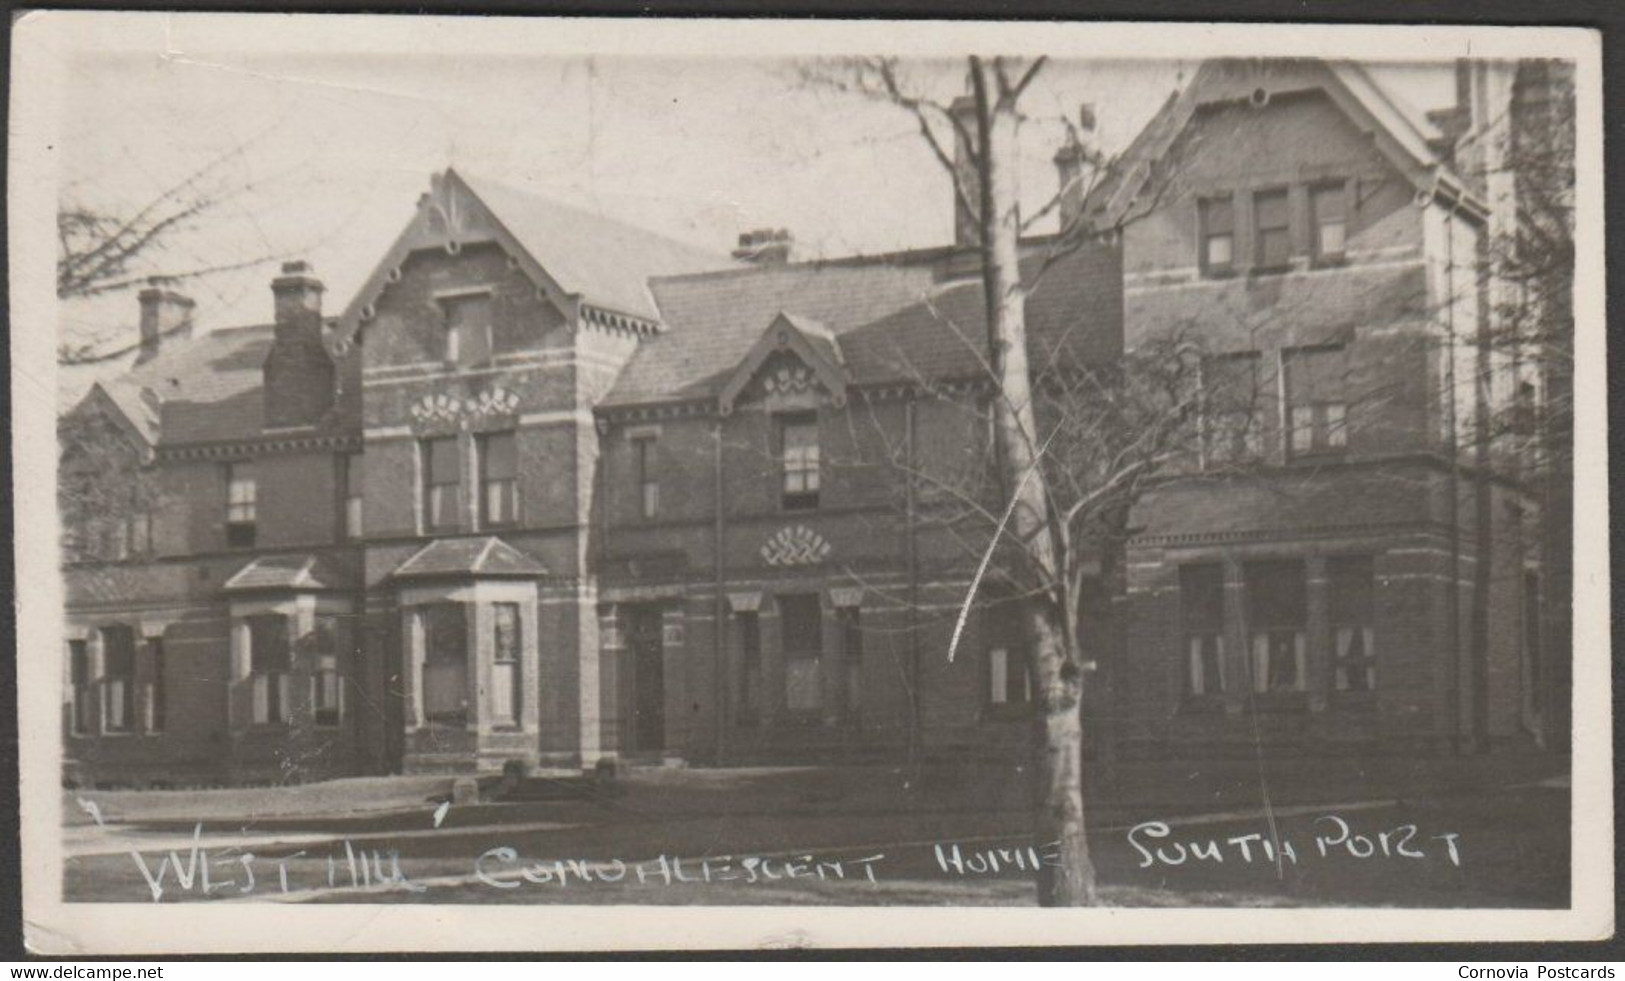 West Hill Convalescent Home, Southport, 1947 - RP Postcard - Southport